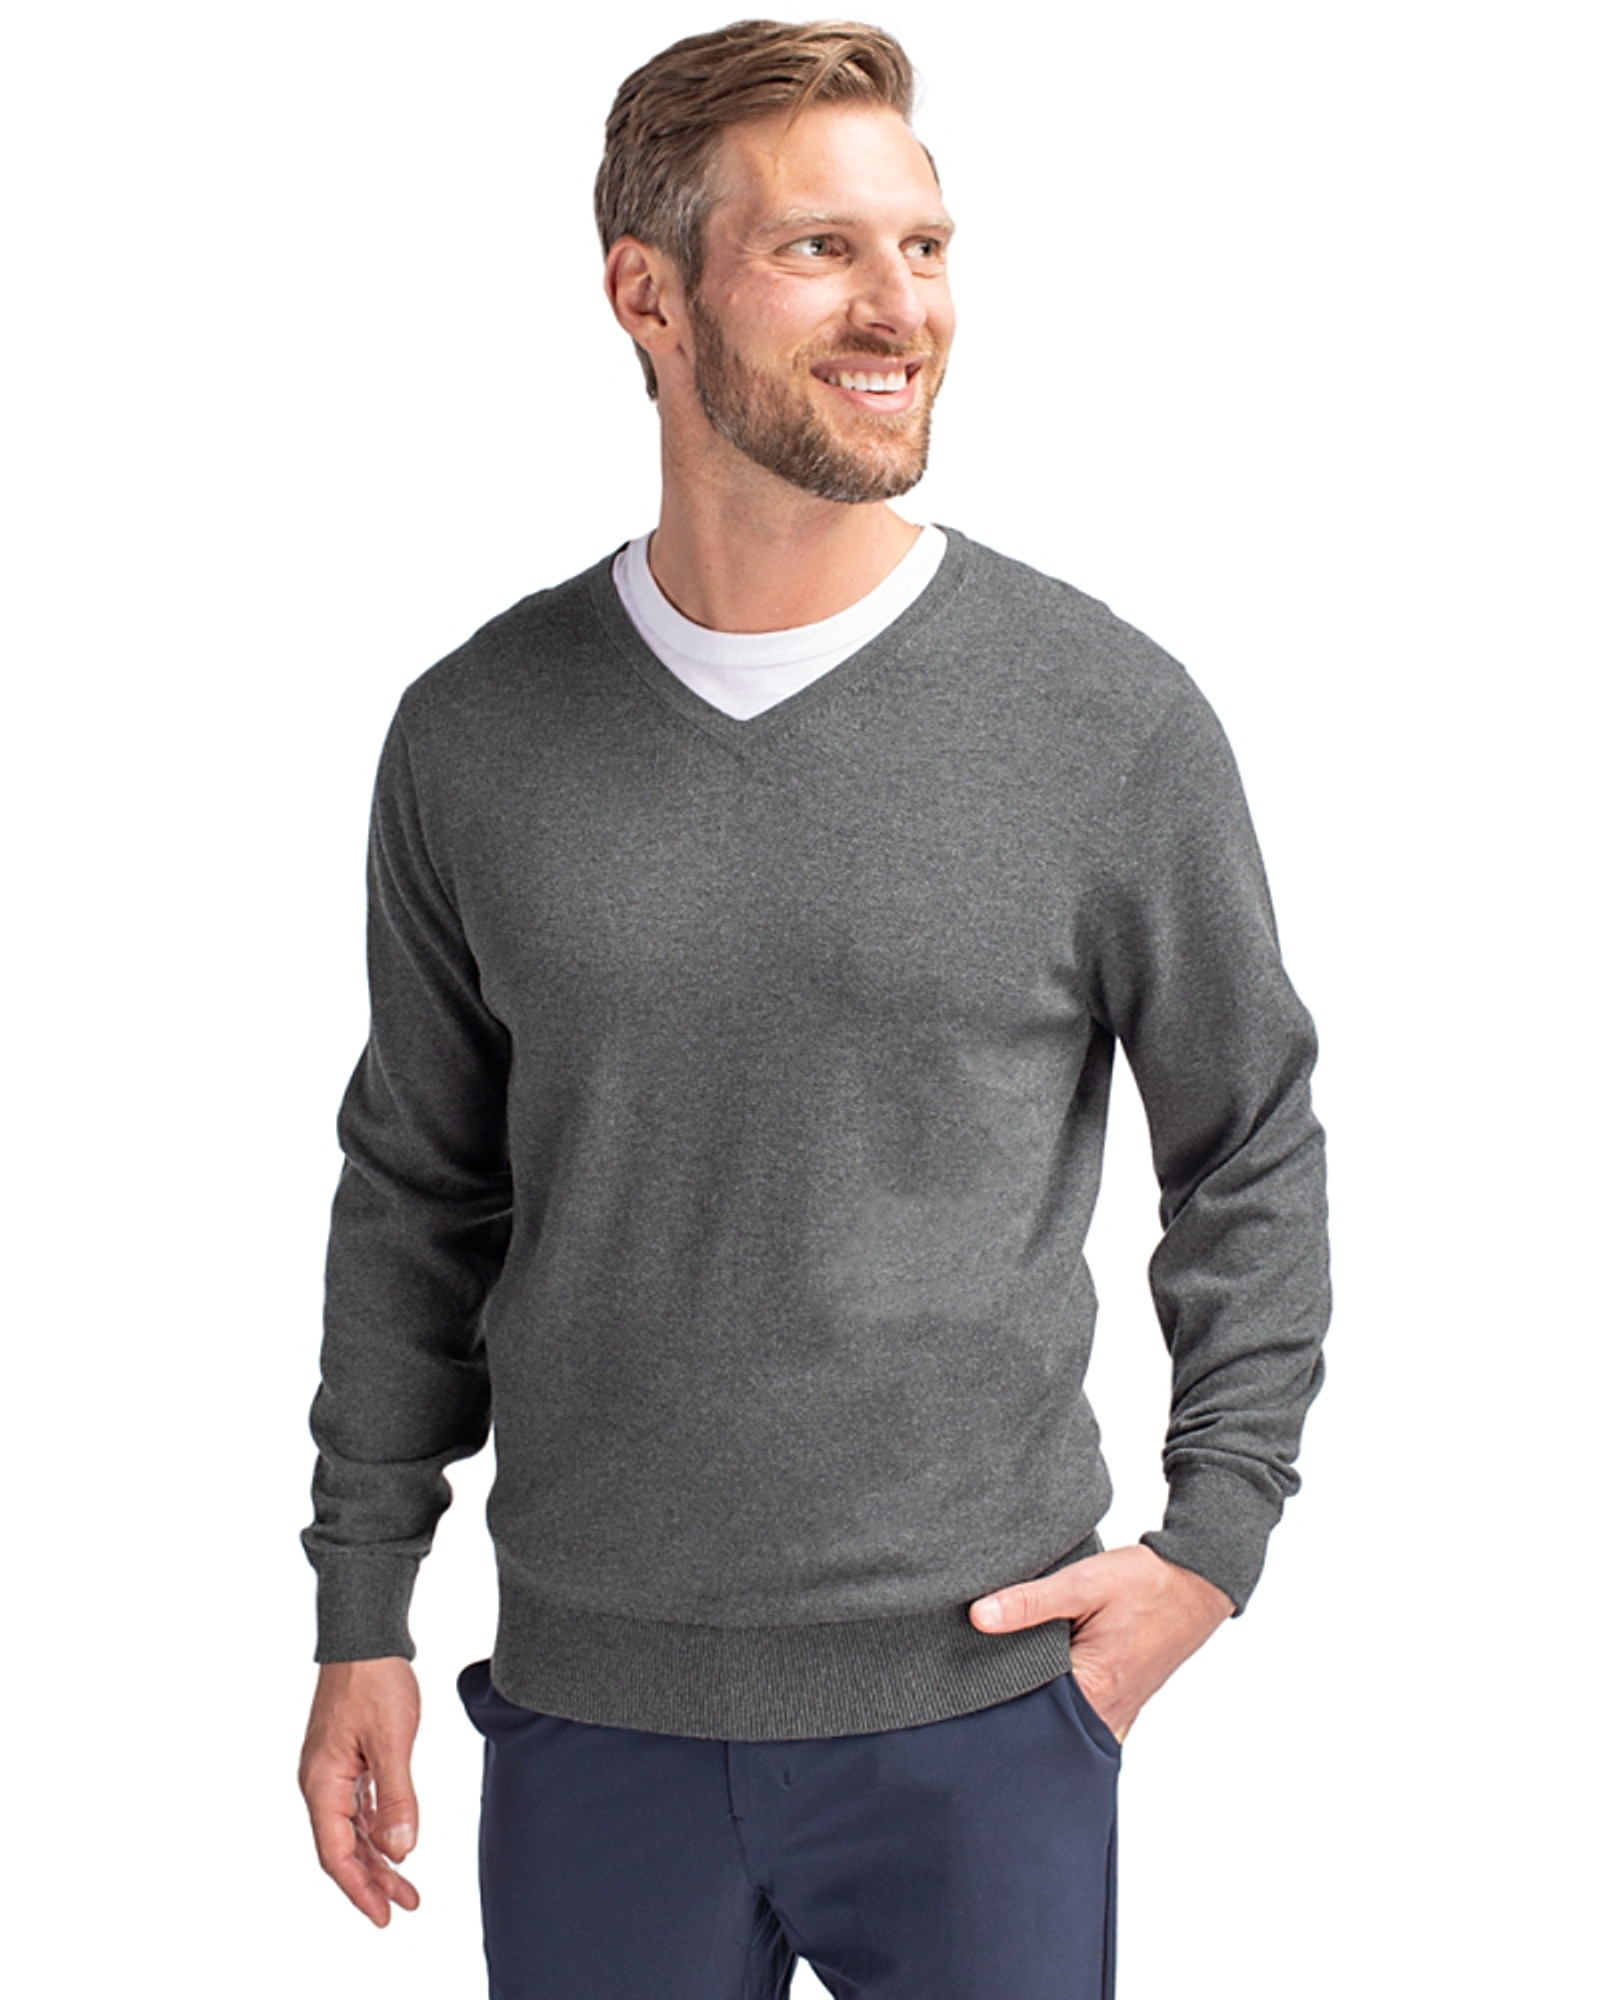 Purfli S and L V Neck Half Grey Blue Sweater